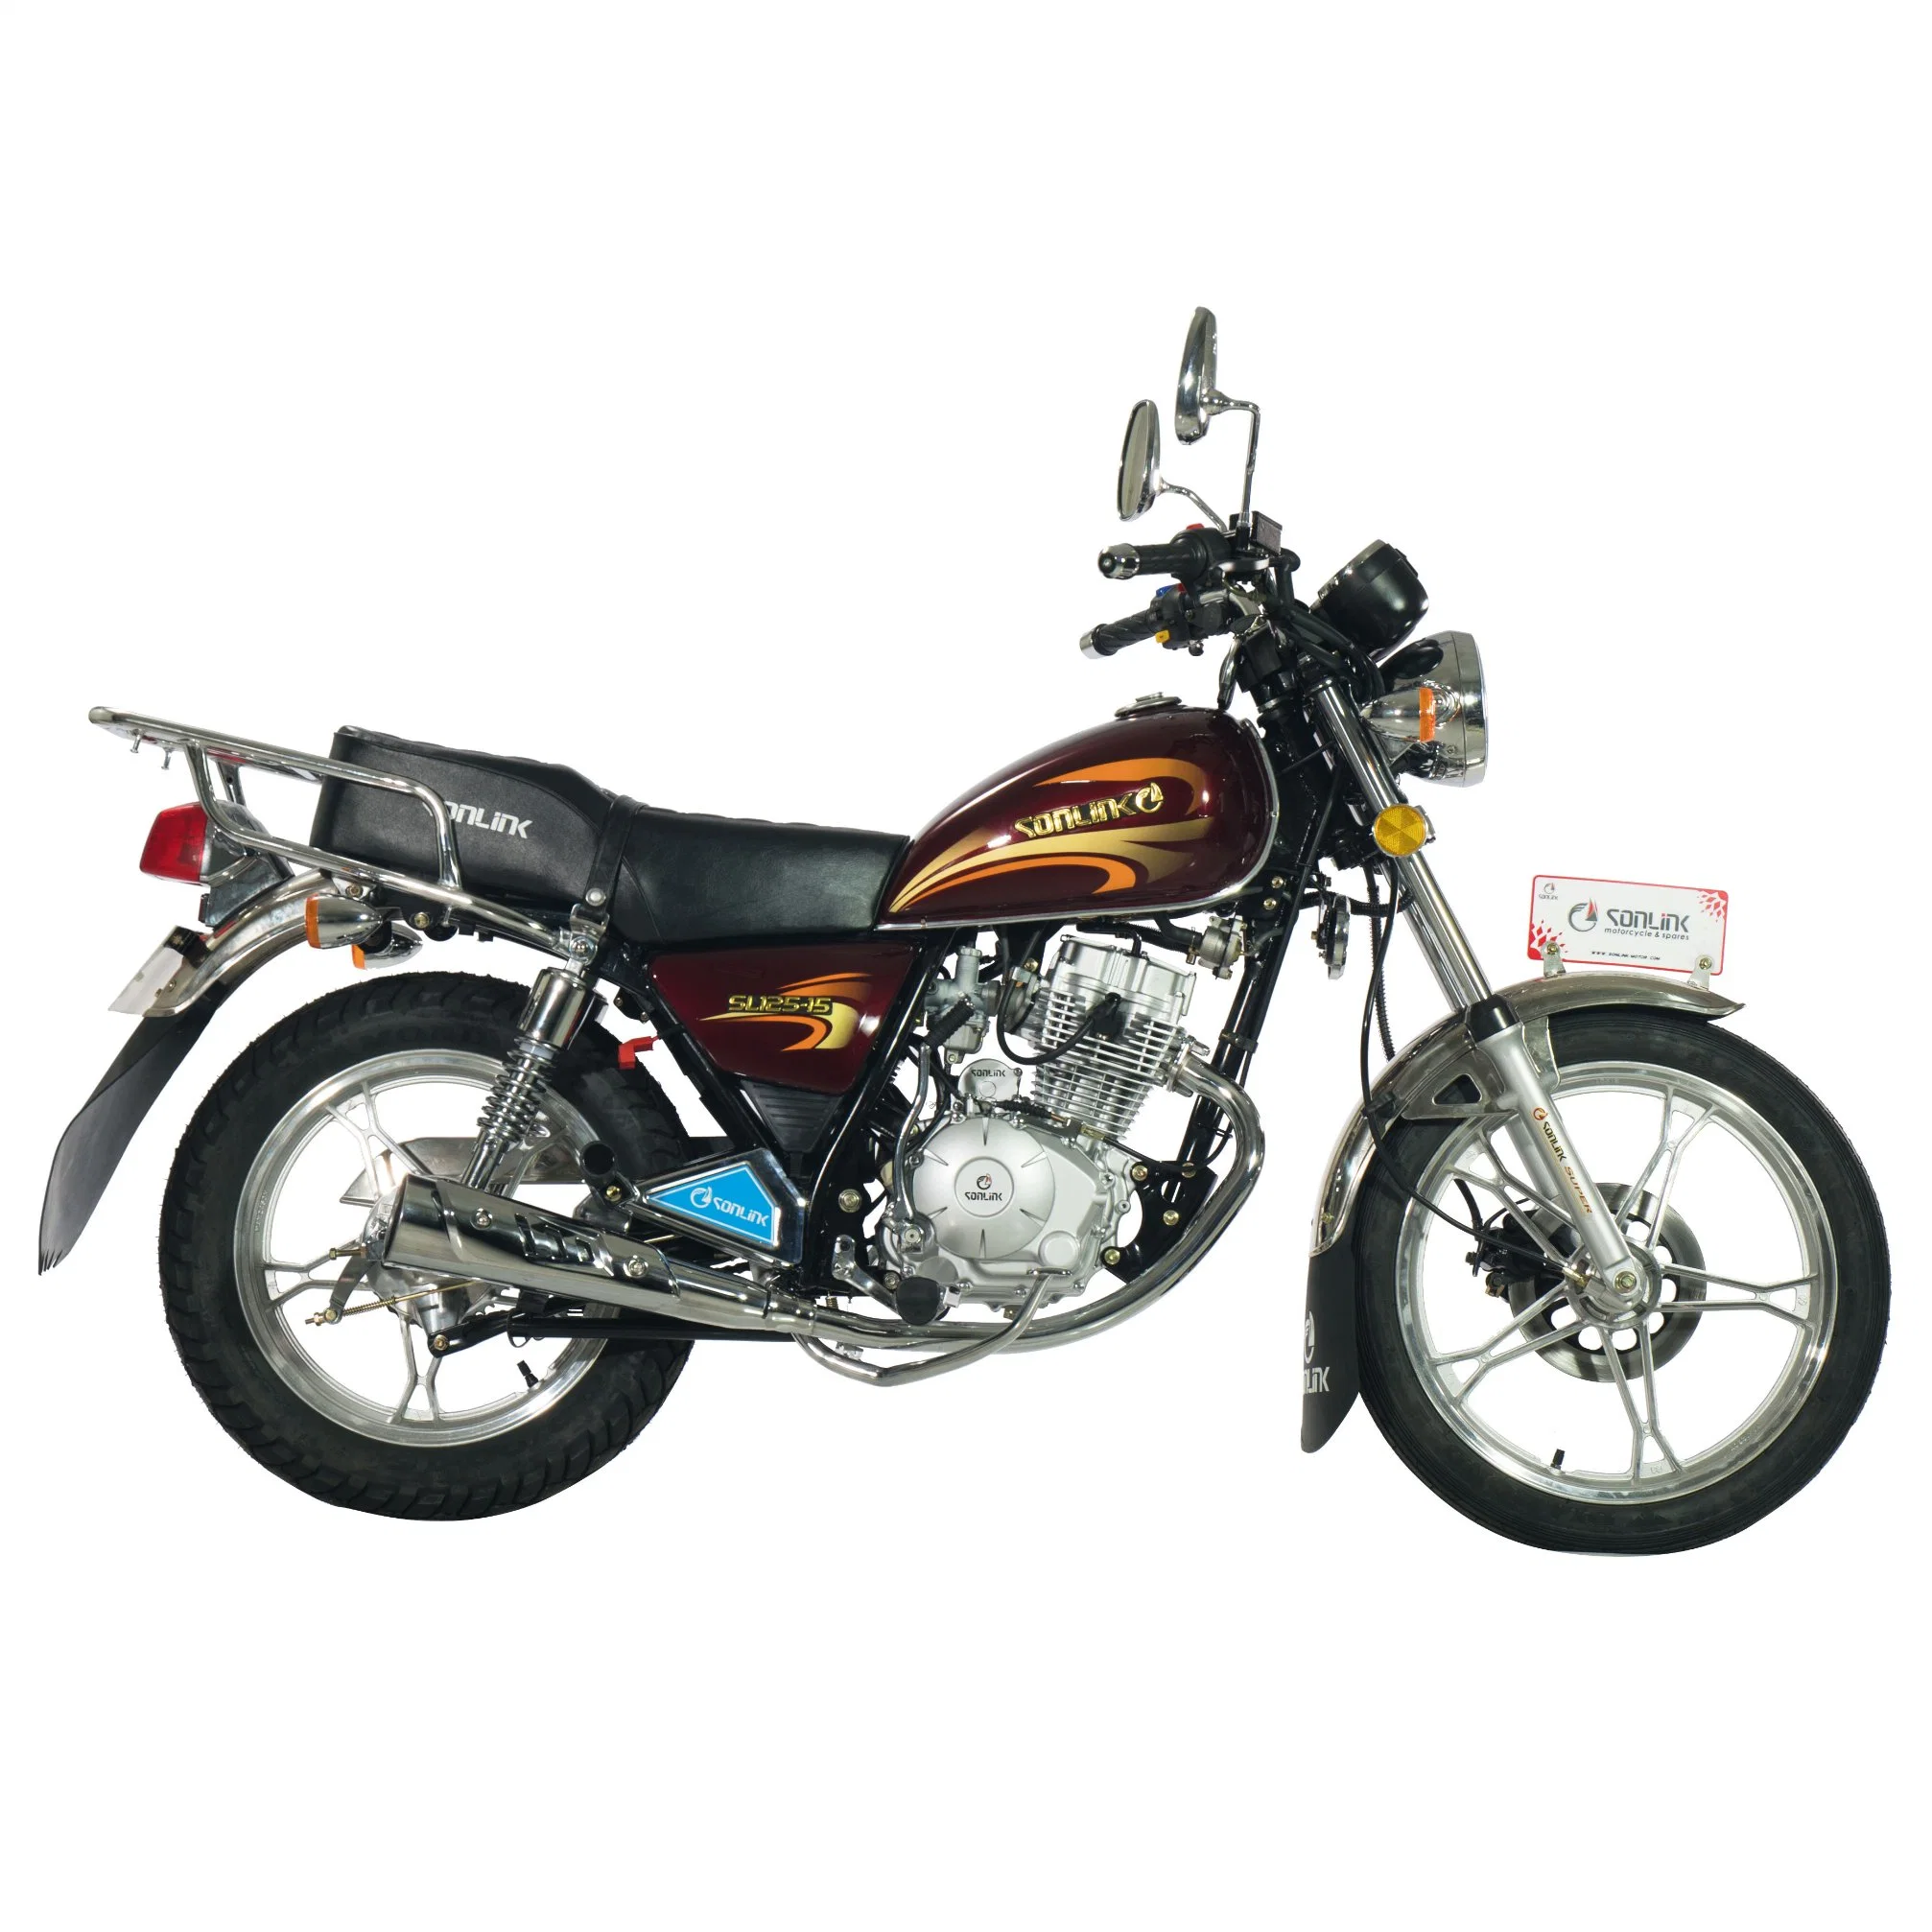 Cheap Chinese Motorcycle Factory Direct Sale 125cc Fuel Prudent Motorcycle/Motorbike/Motor